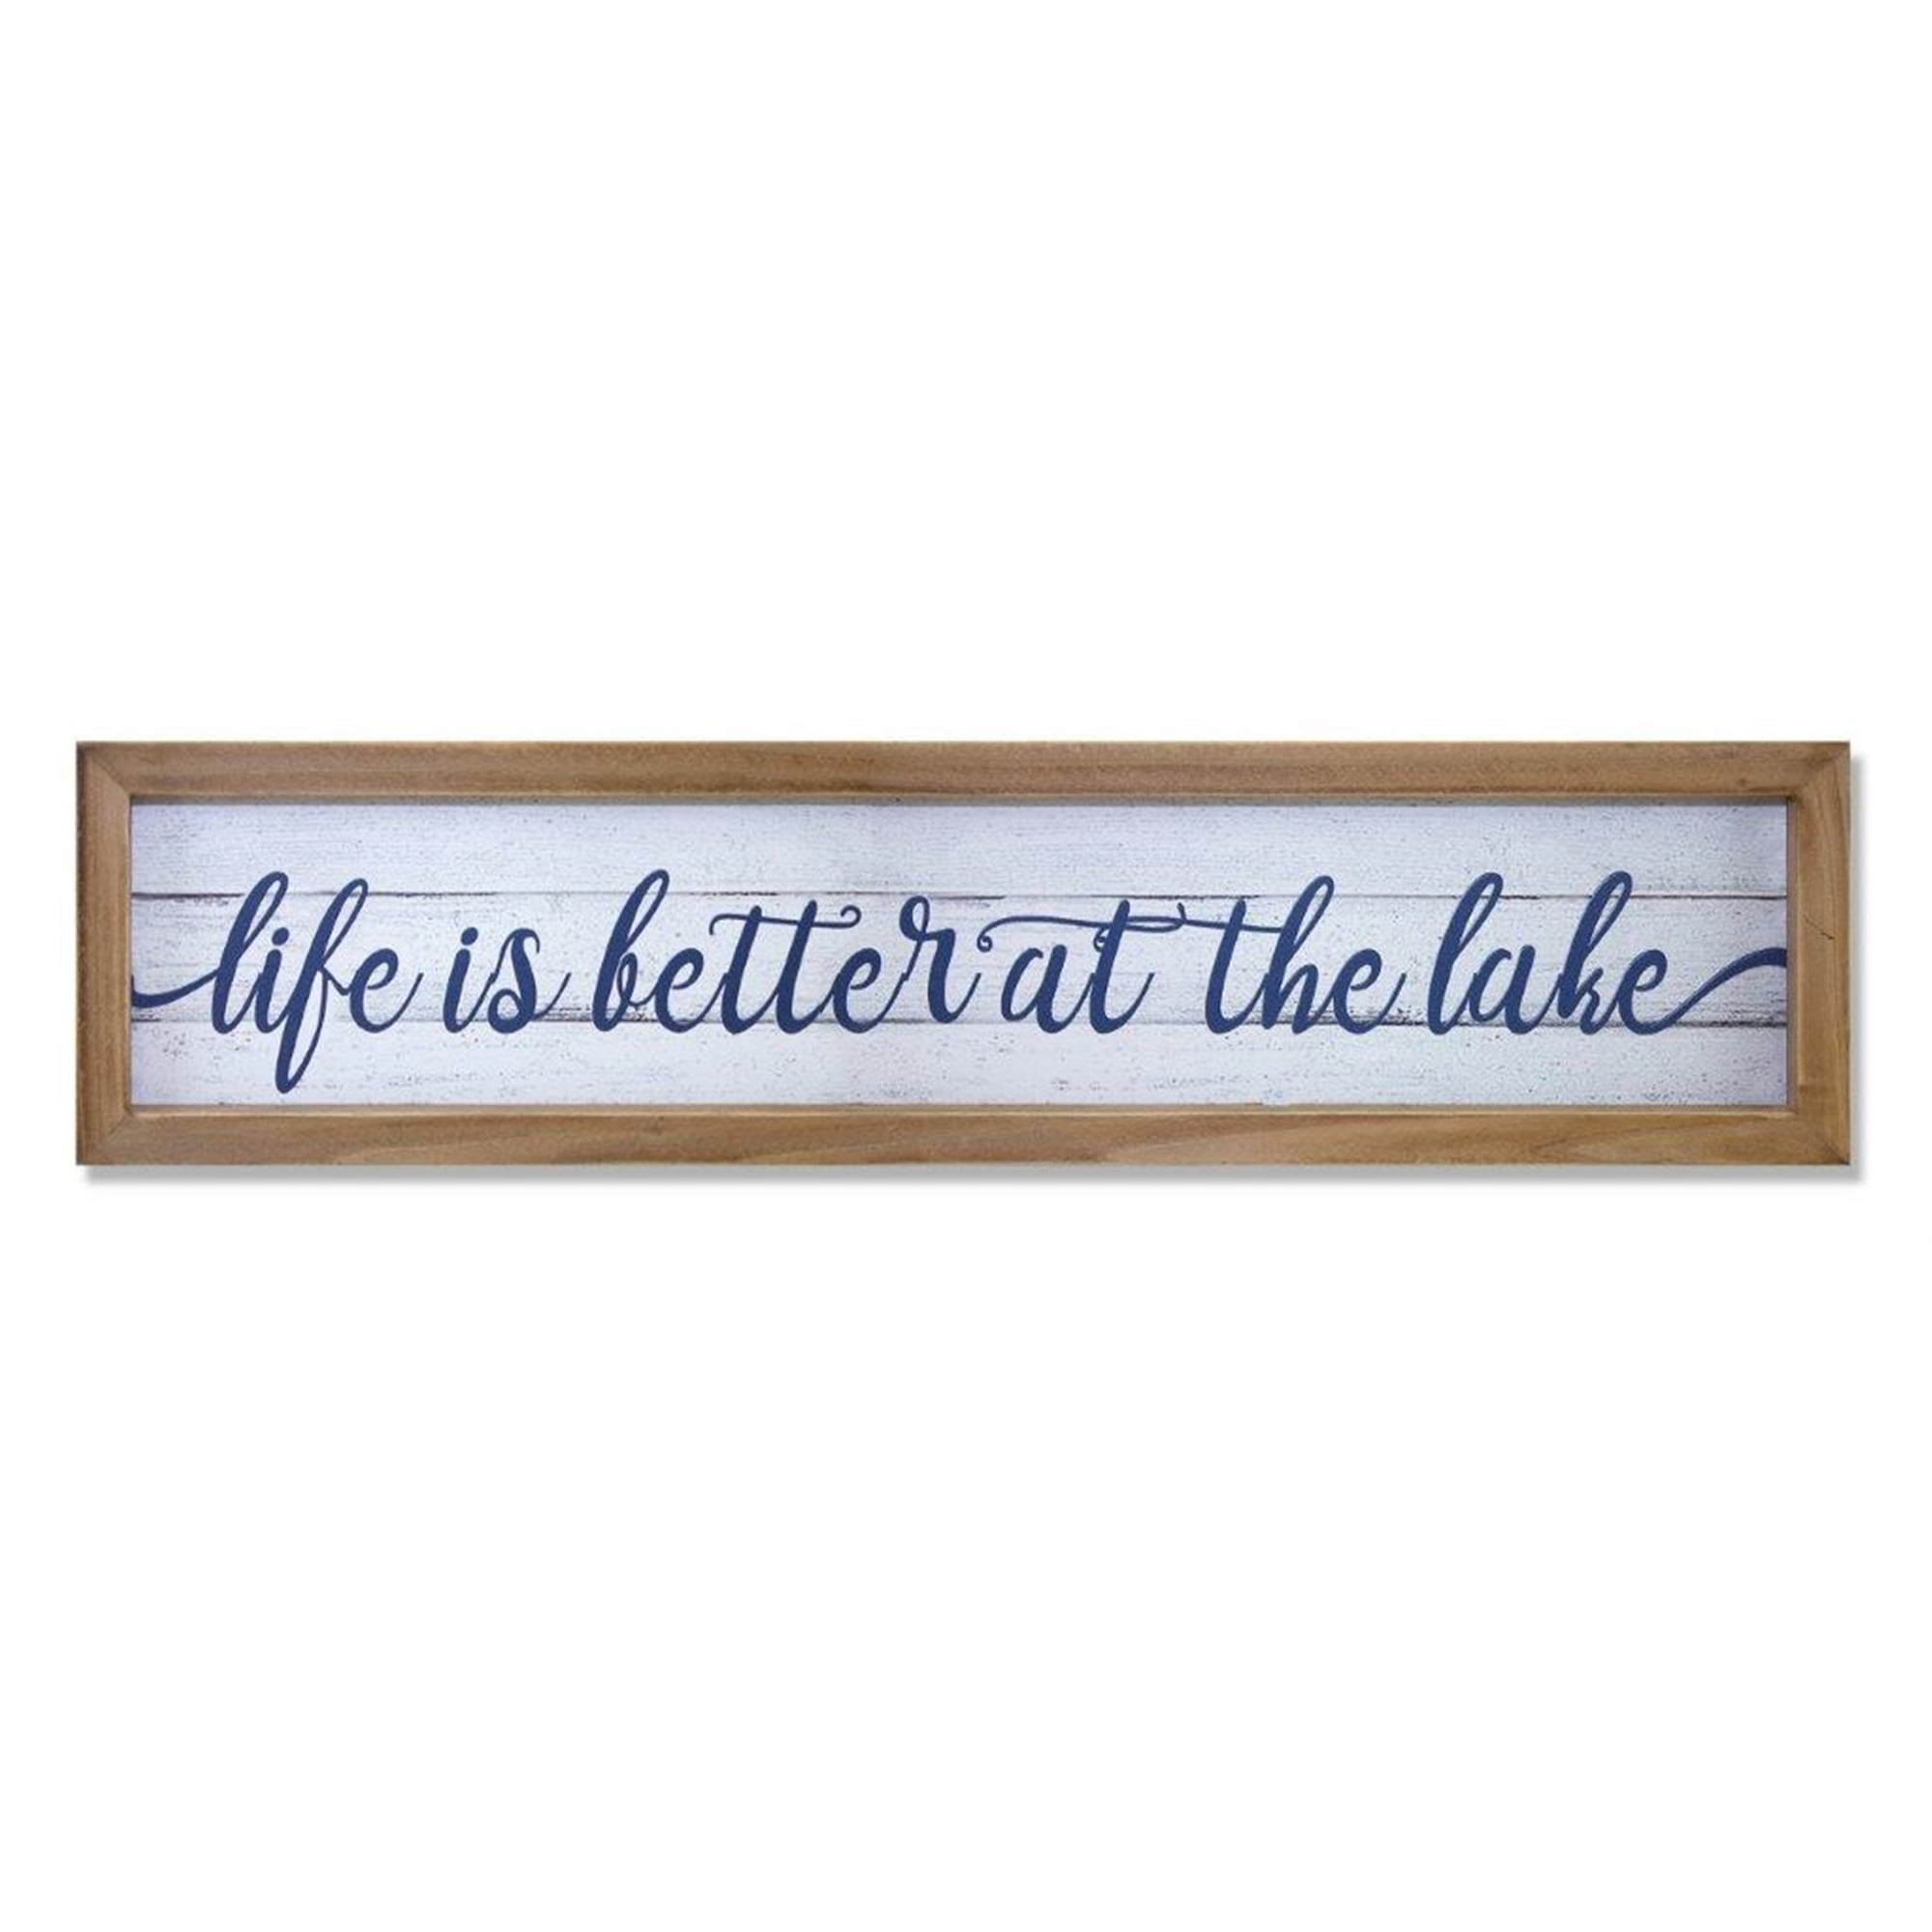 Life Is Better At The Lake Sign 25"L x 6"H MDF/Wood